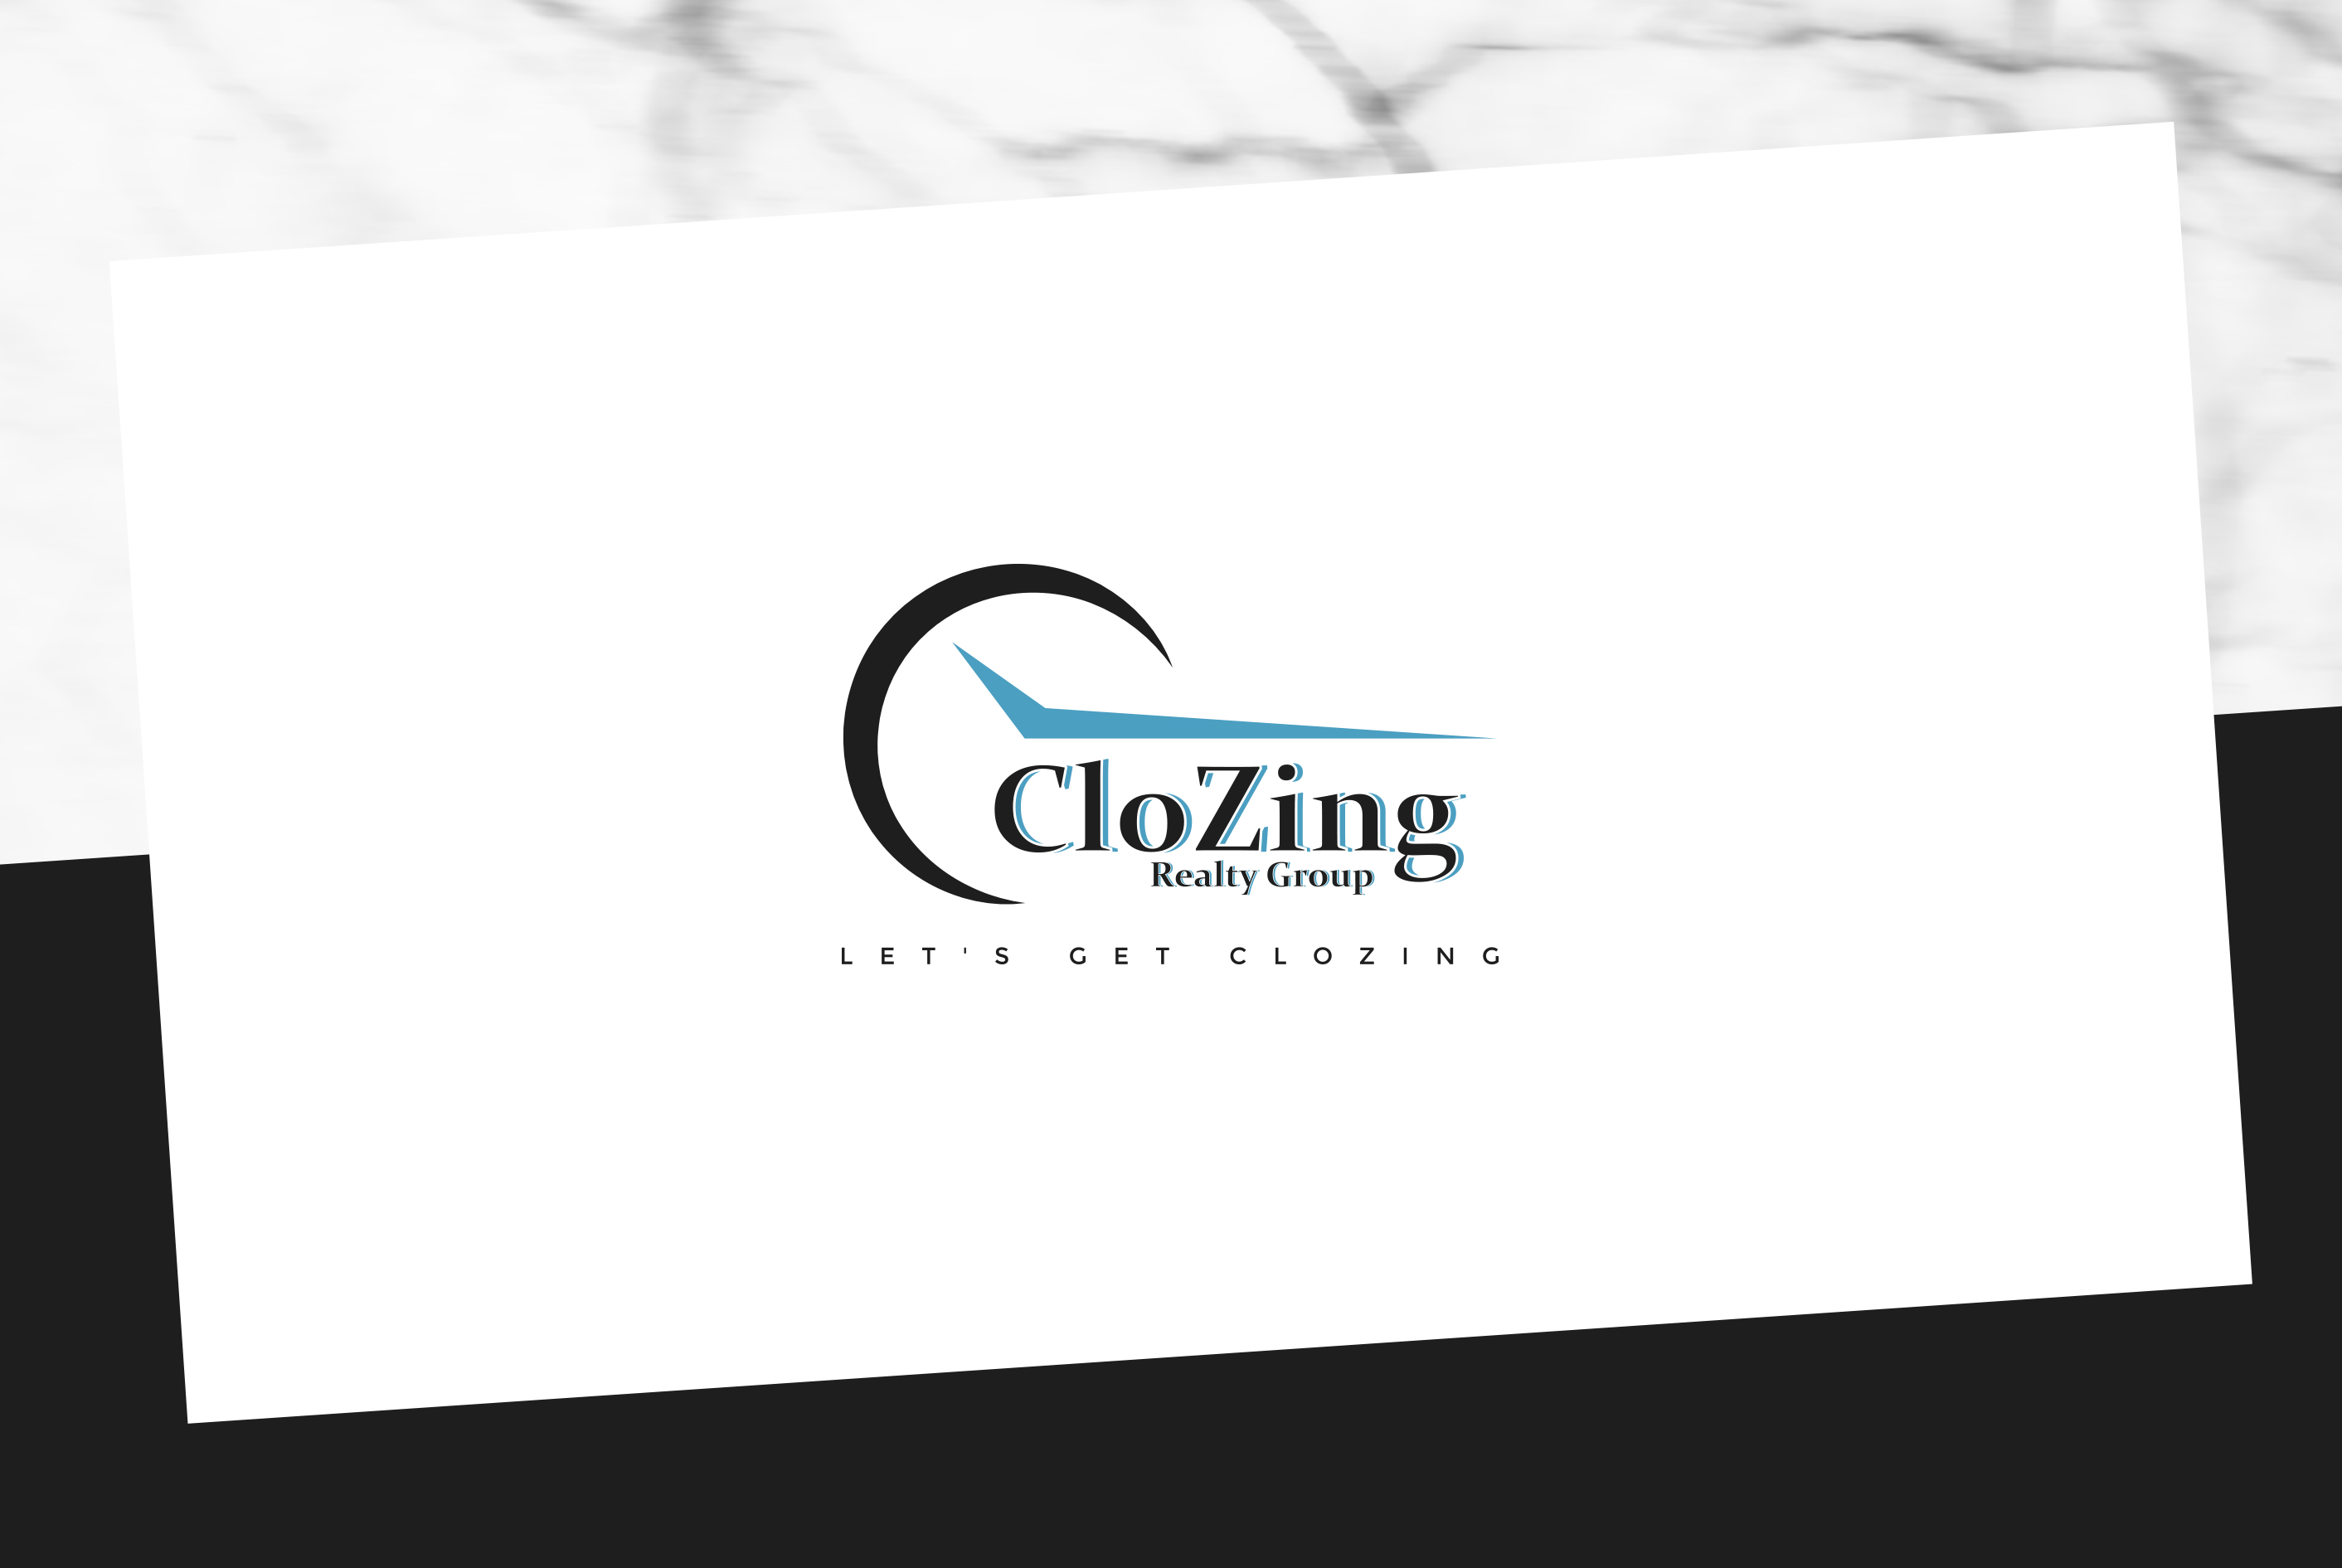 Clozing Realty Group Design #1